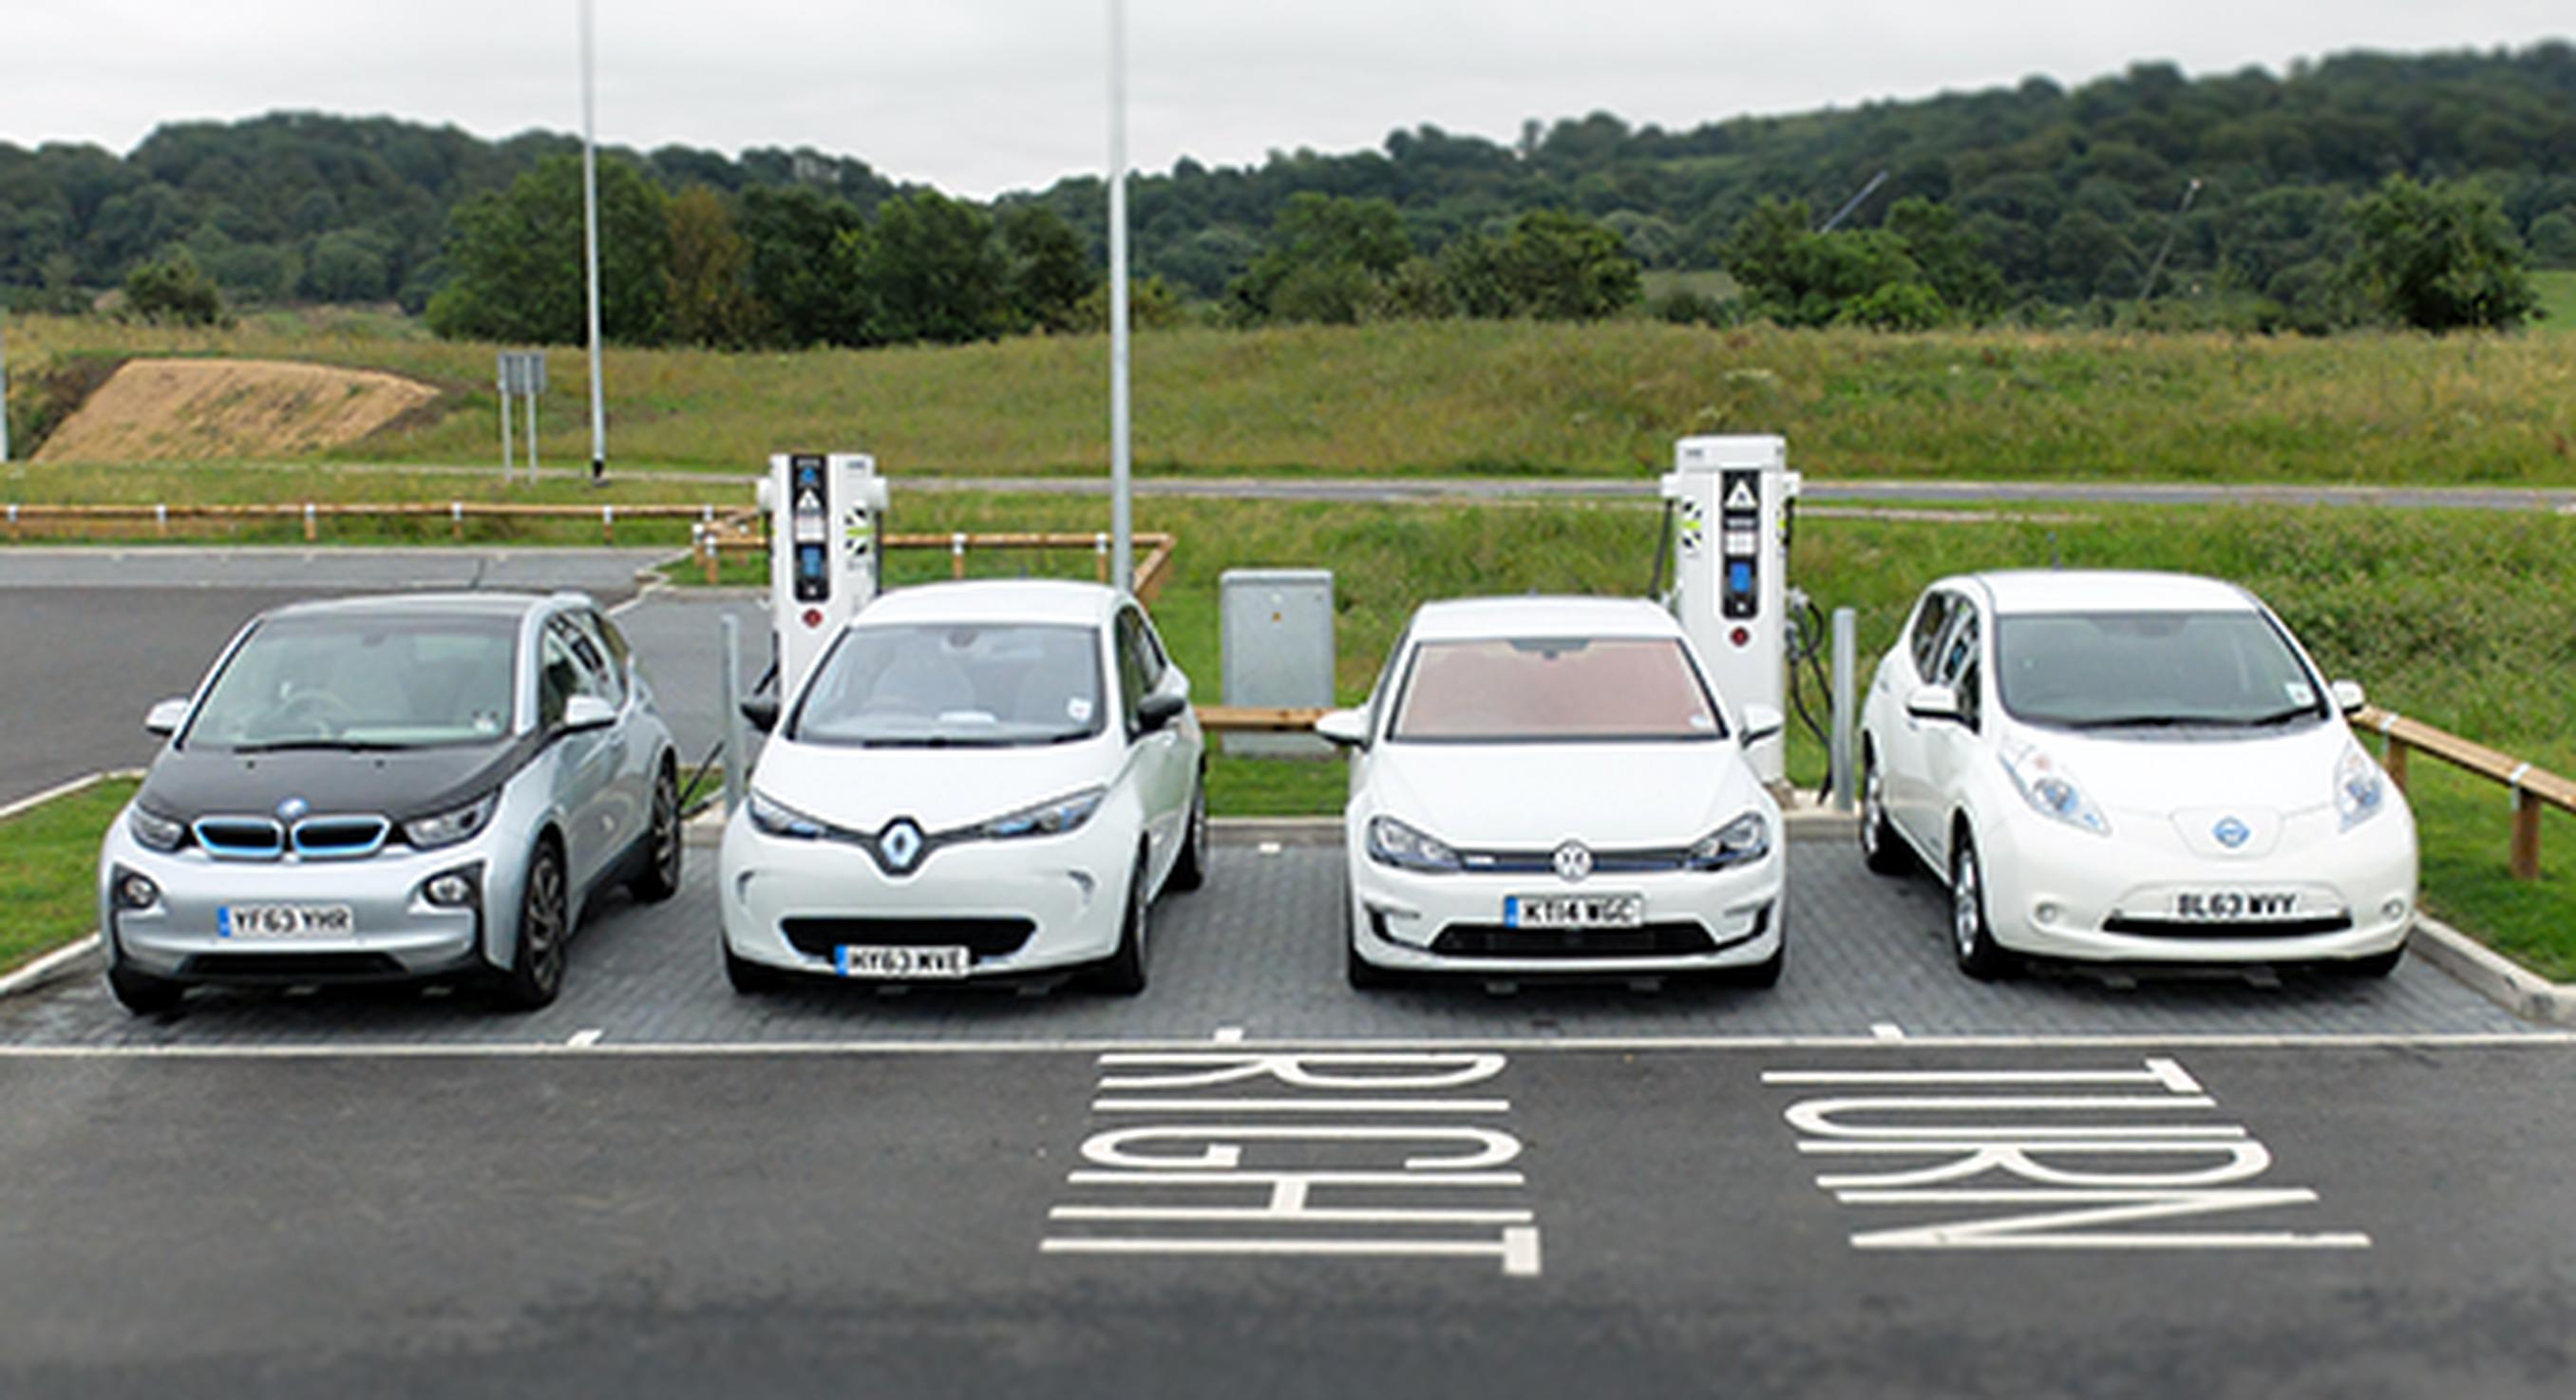 The Electric Highway currently has almost 300 EV chargers